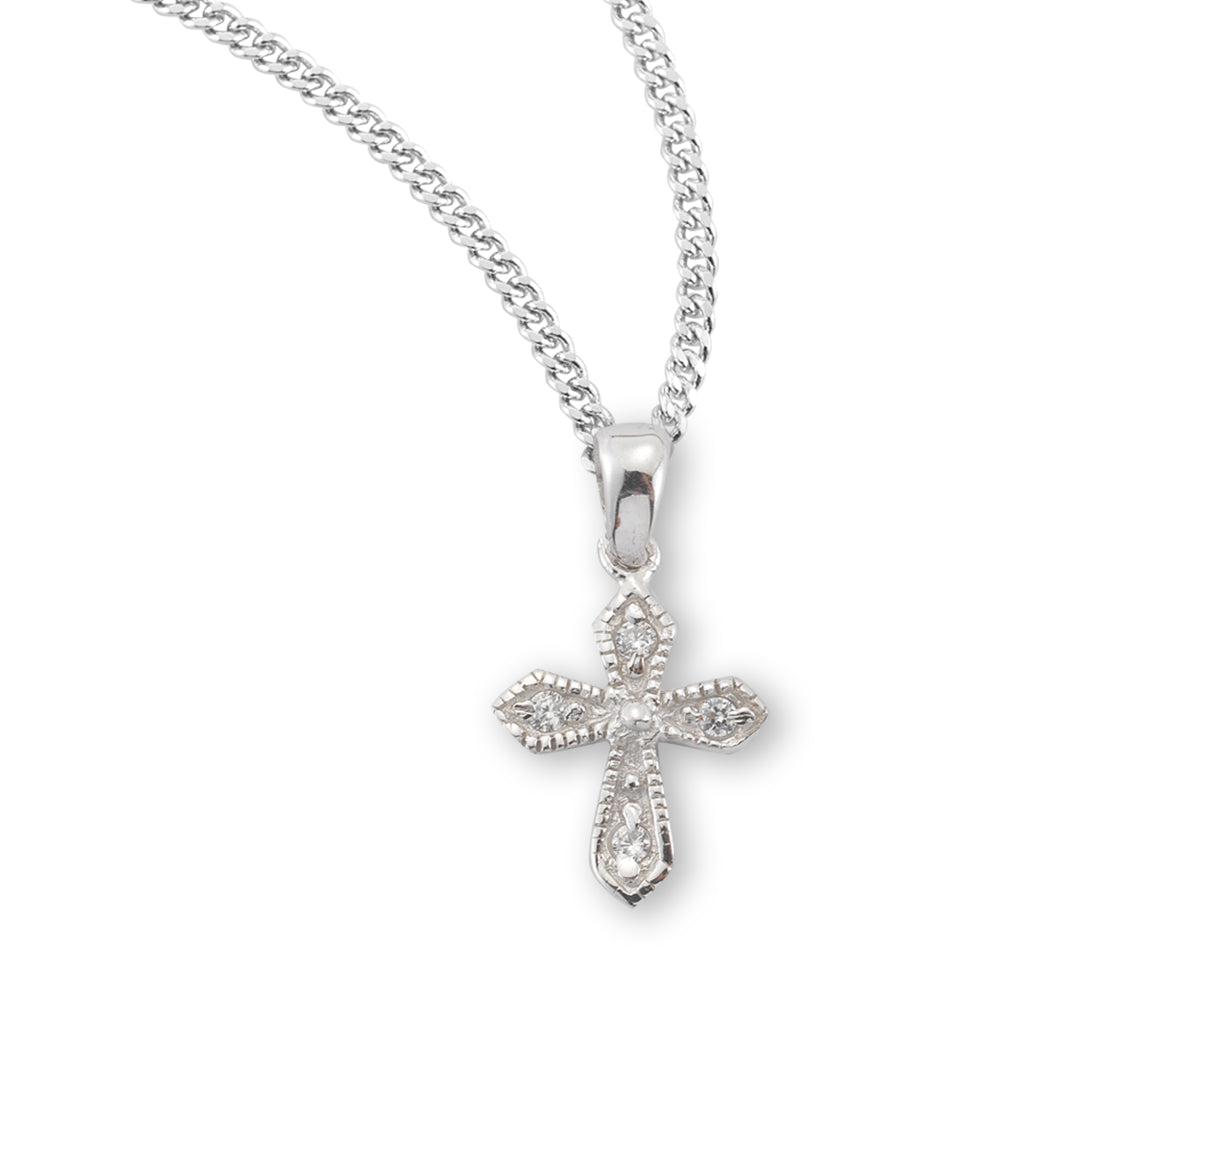 Sterling Silver Cross with Crystal Cubic Zirconia's "CZ's"